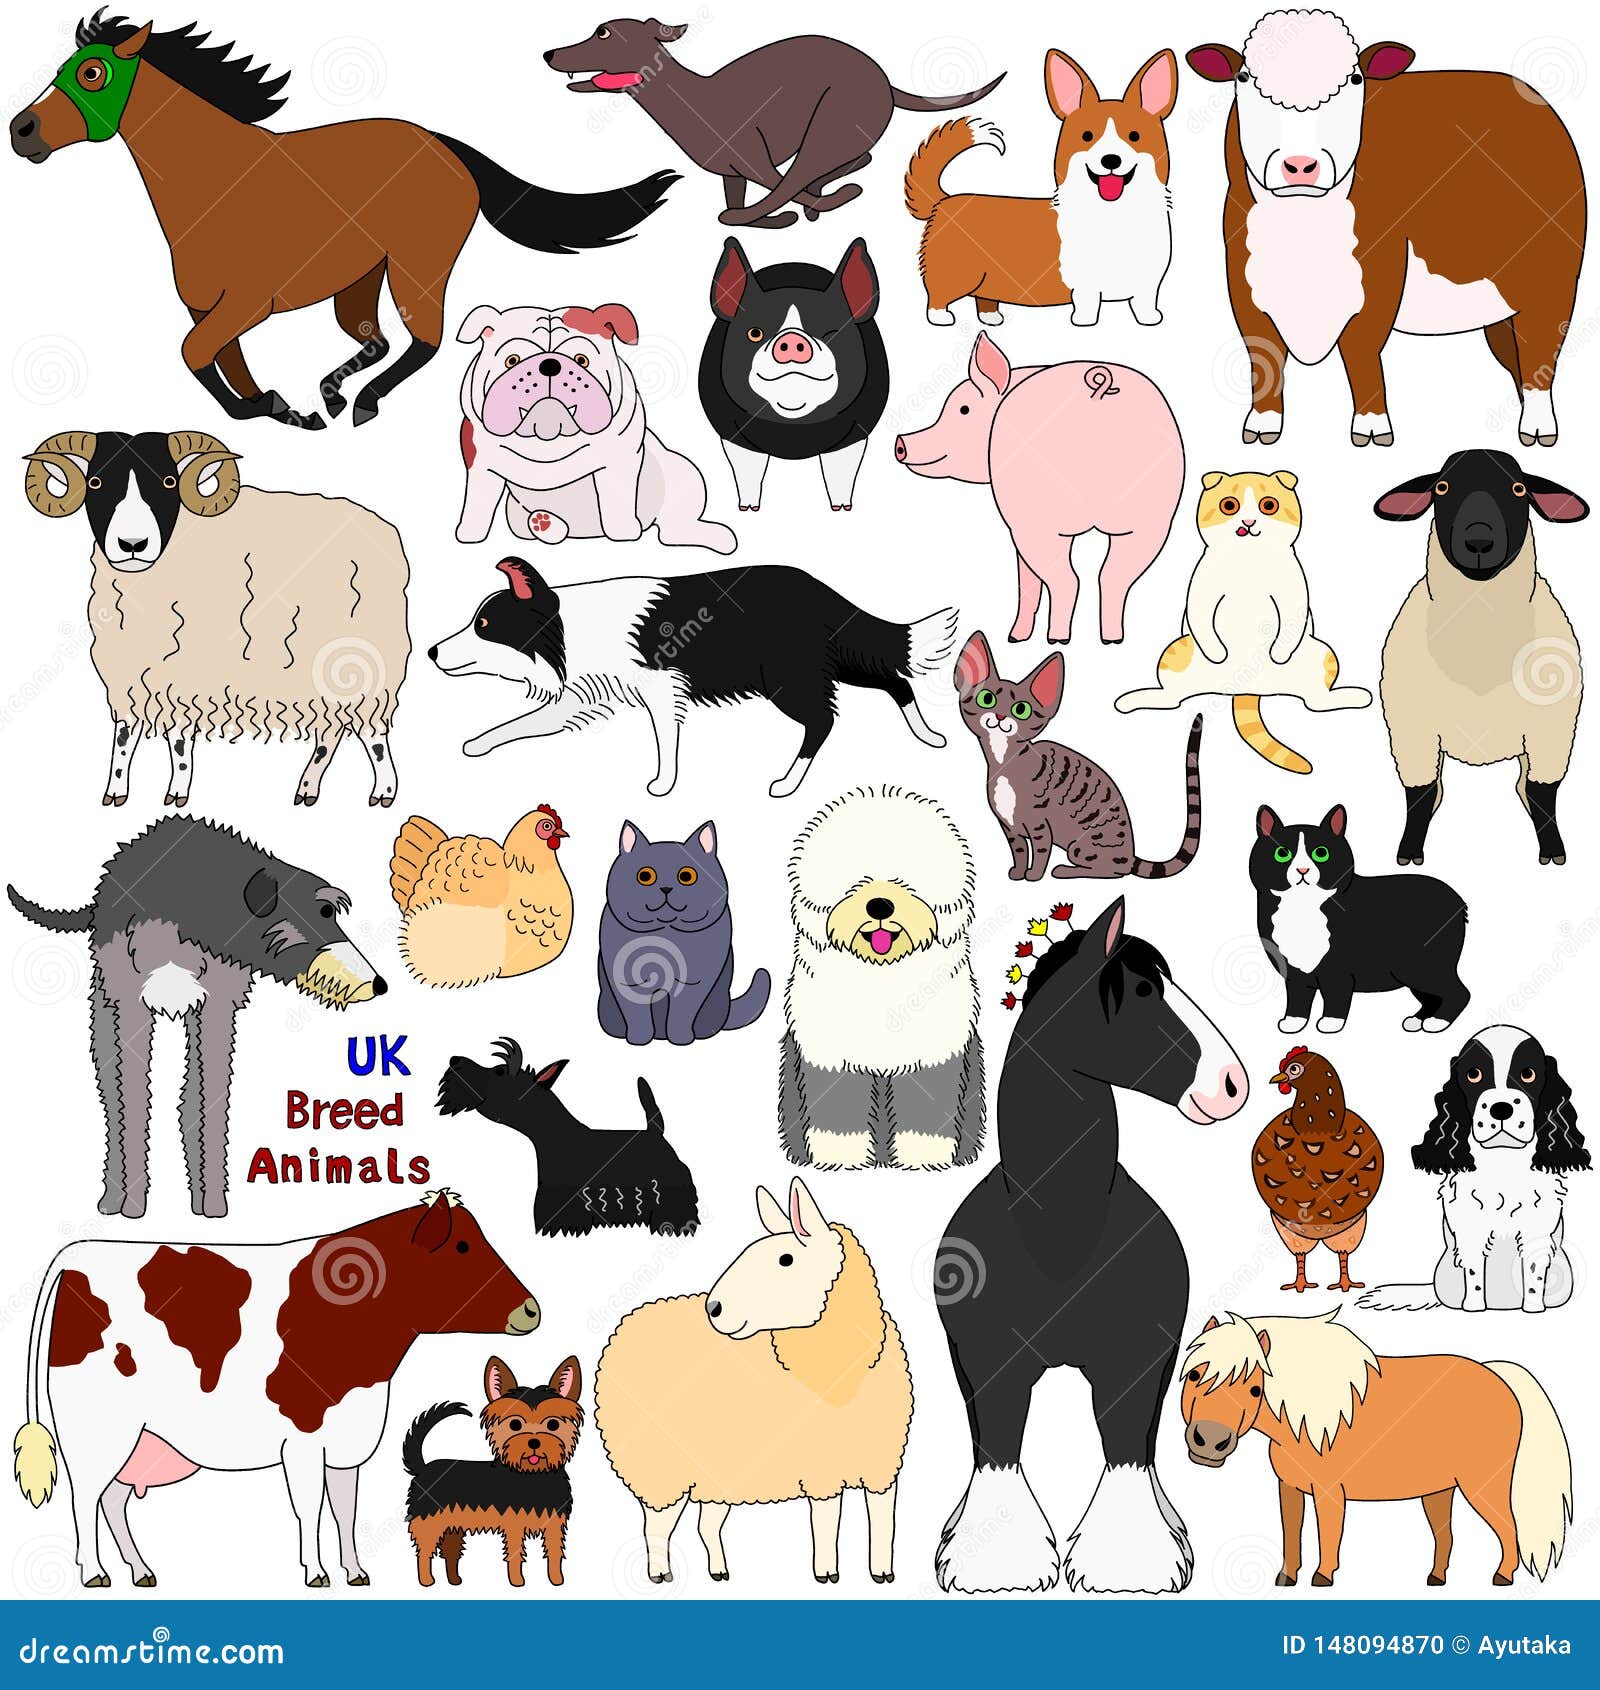 Doodle of UK breed animals stock vector. Illustration of bred - 148094870